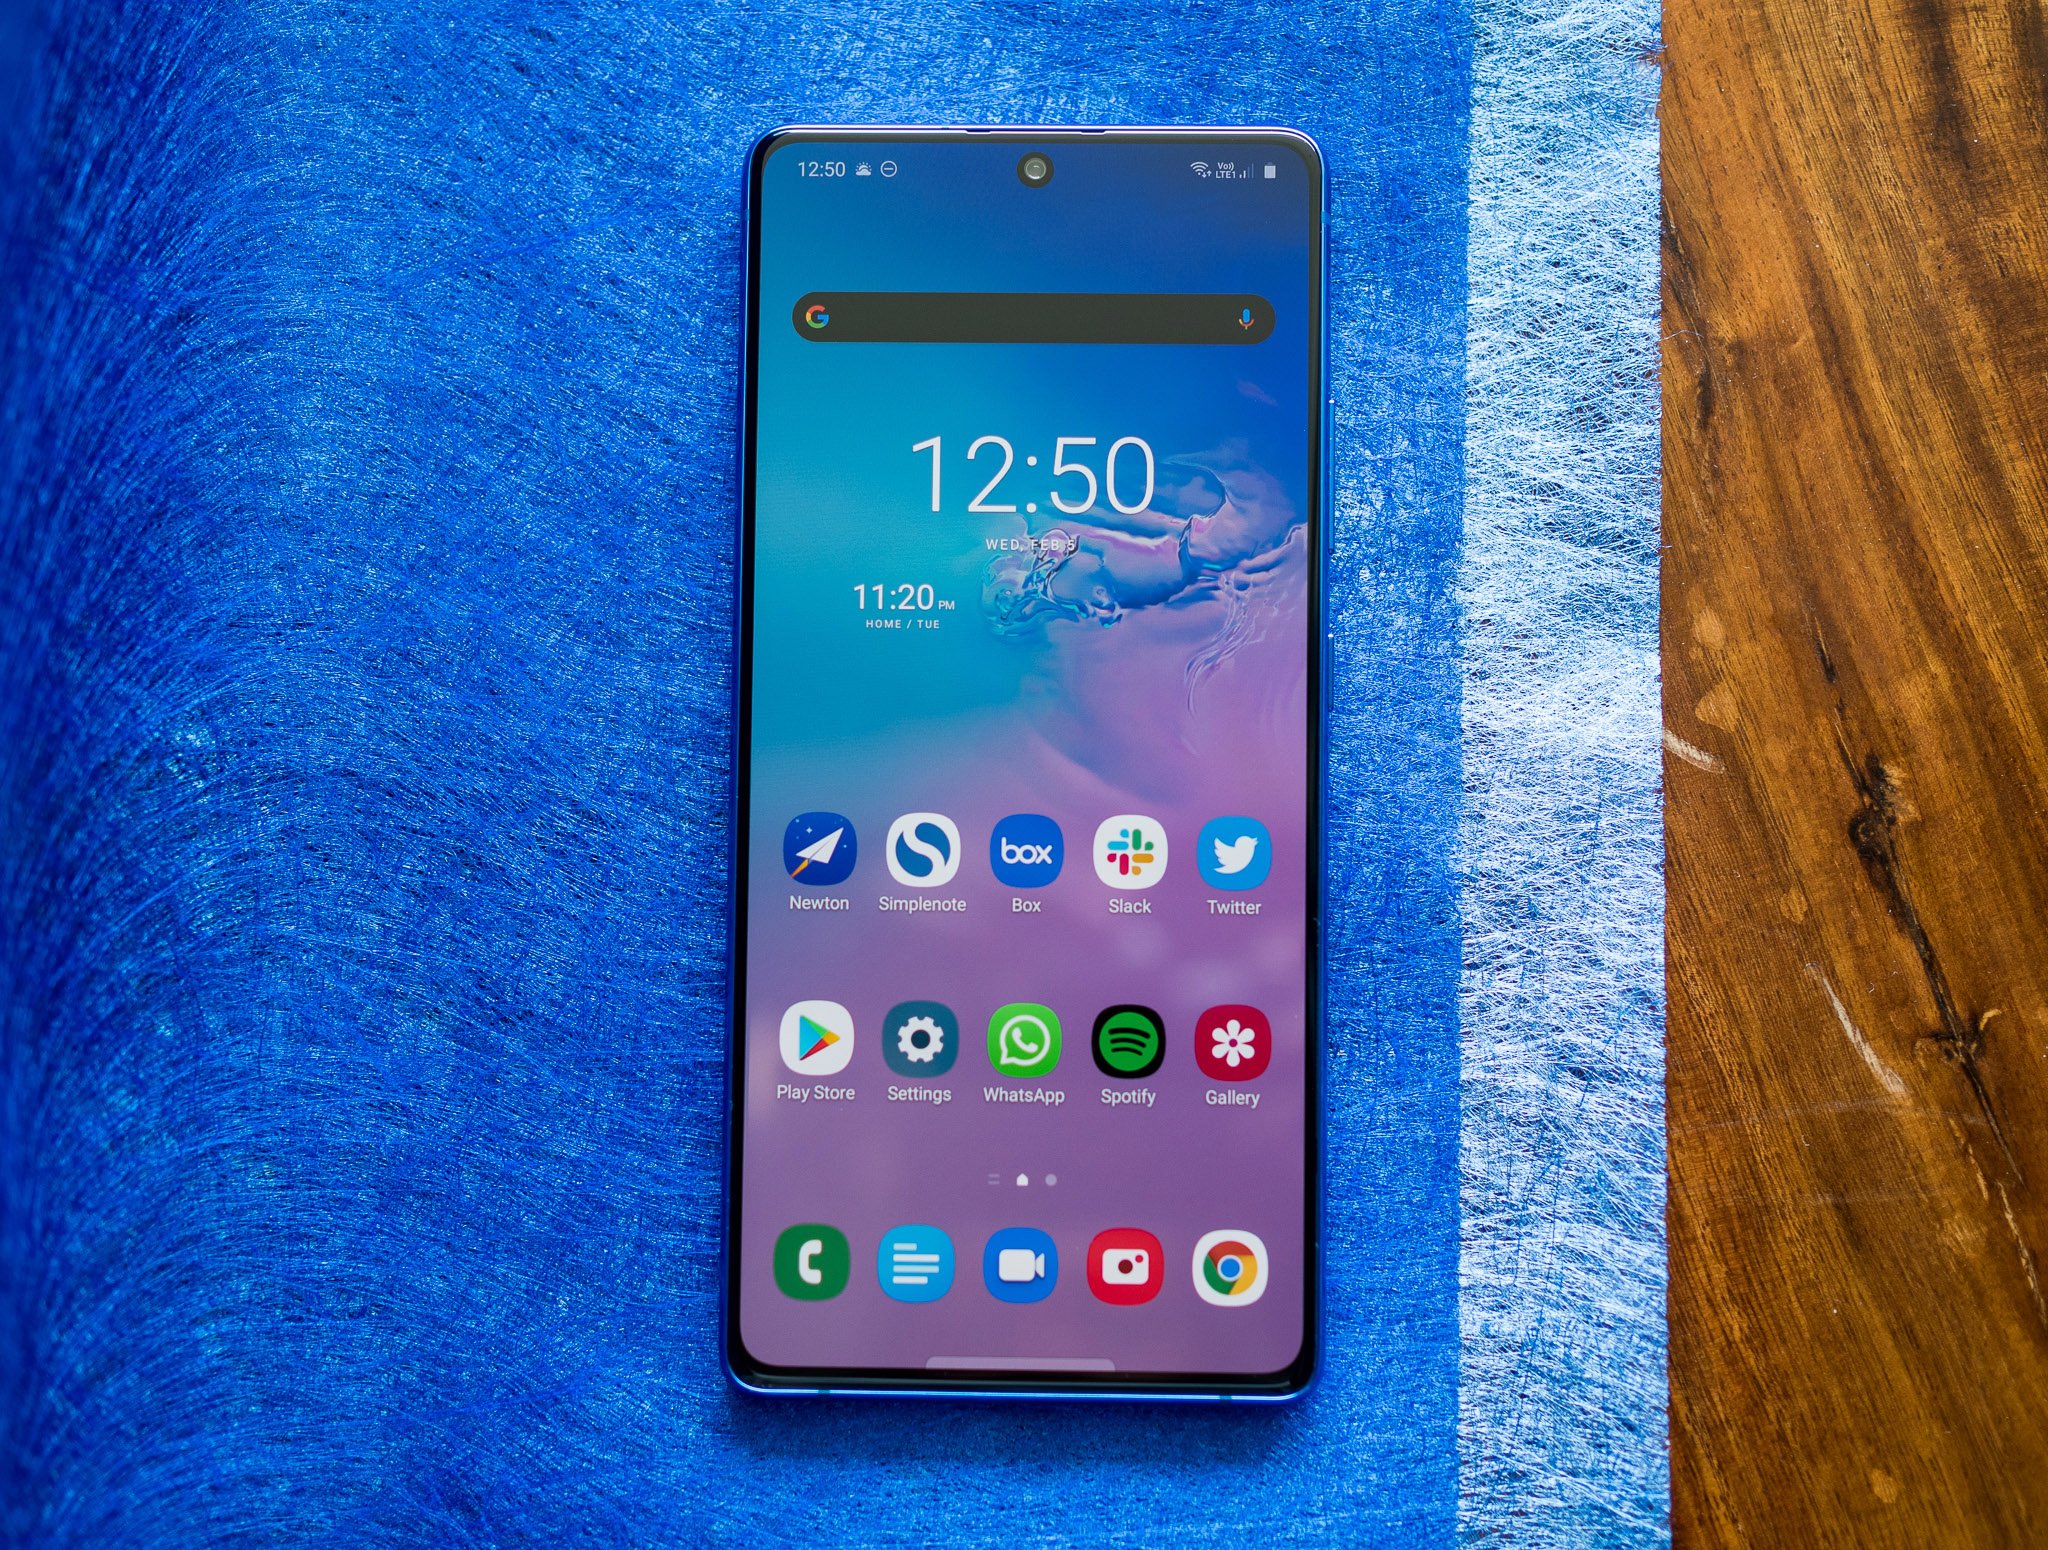 Samsung Galaxy Note 10 Lite review: A noteworthy Note 10!